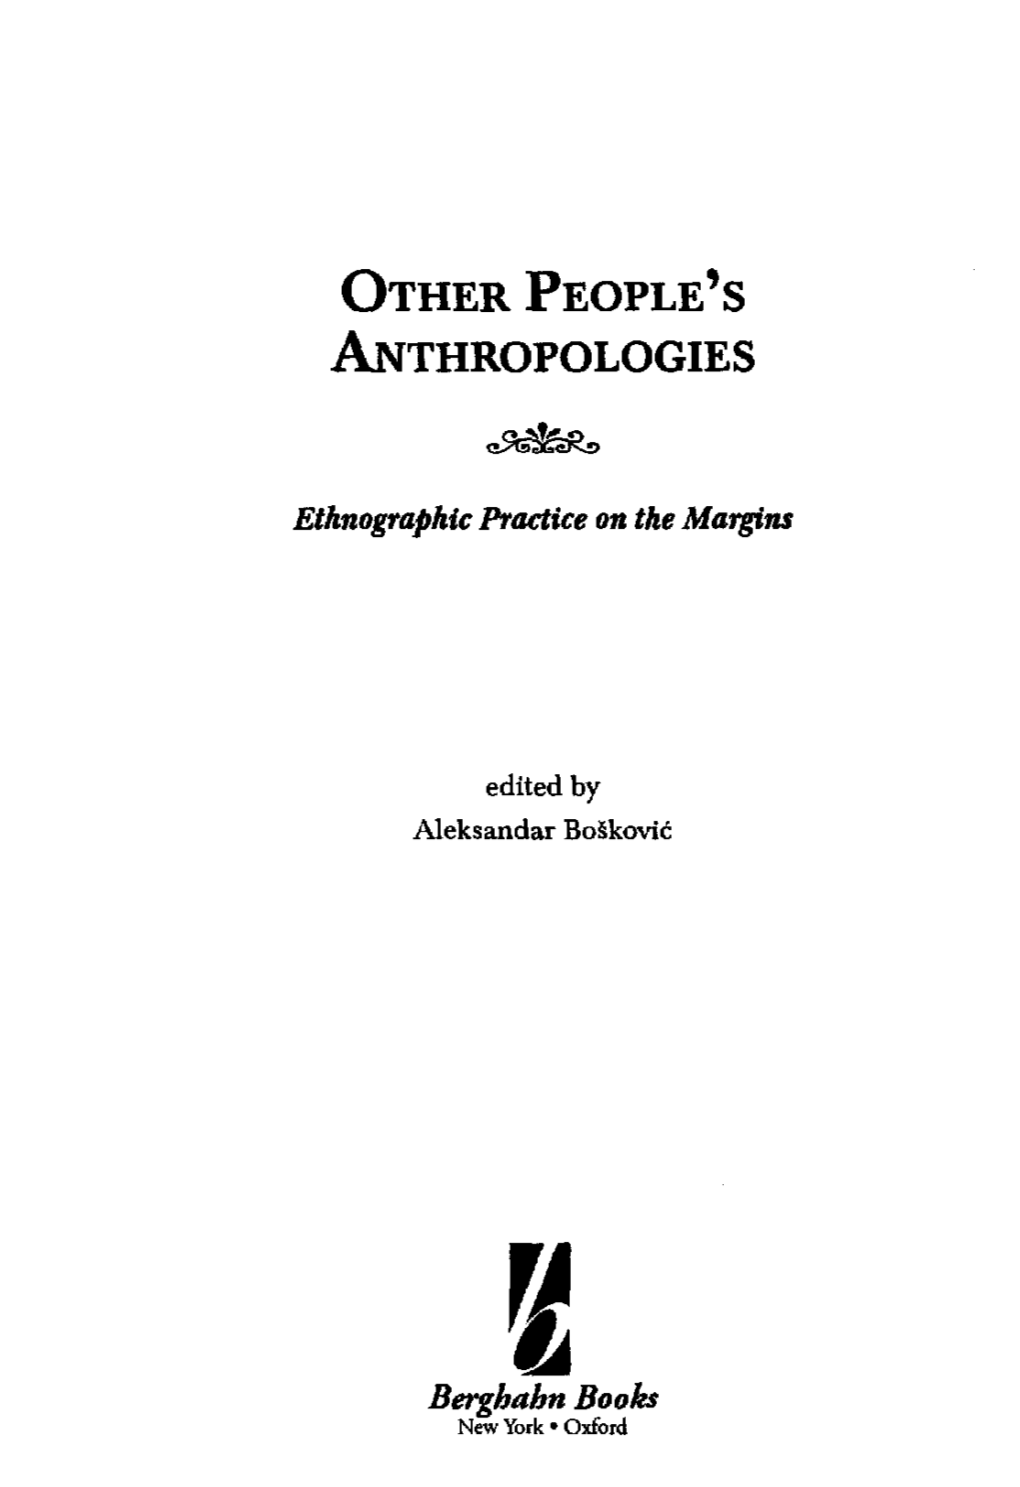 Üther People's Anthropologies